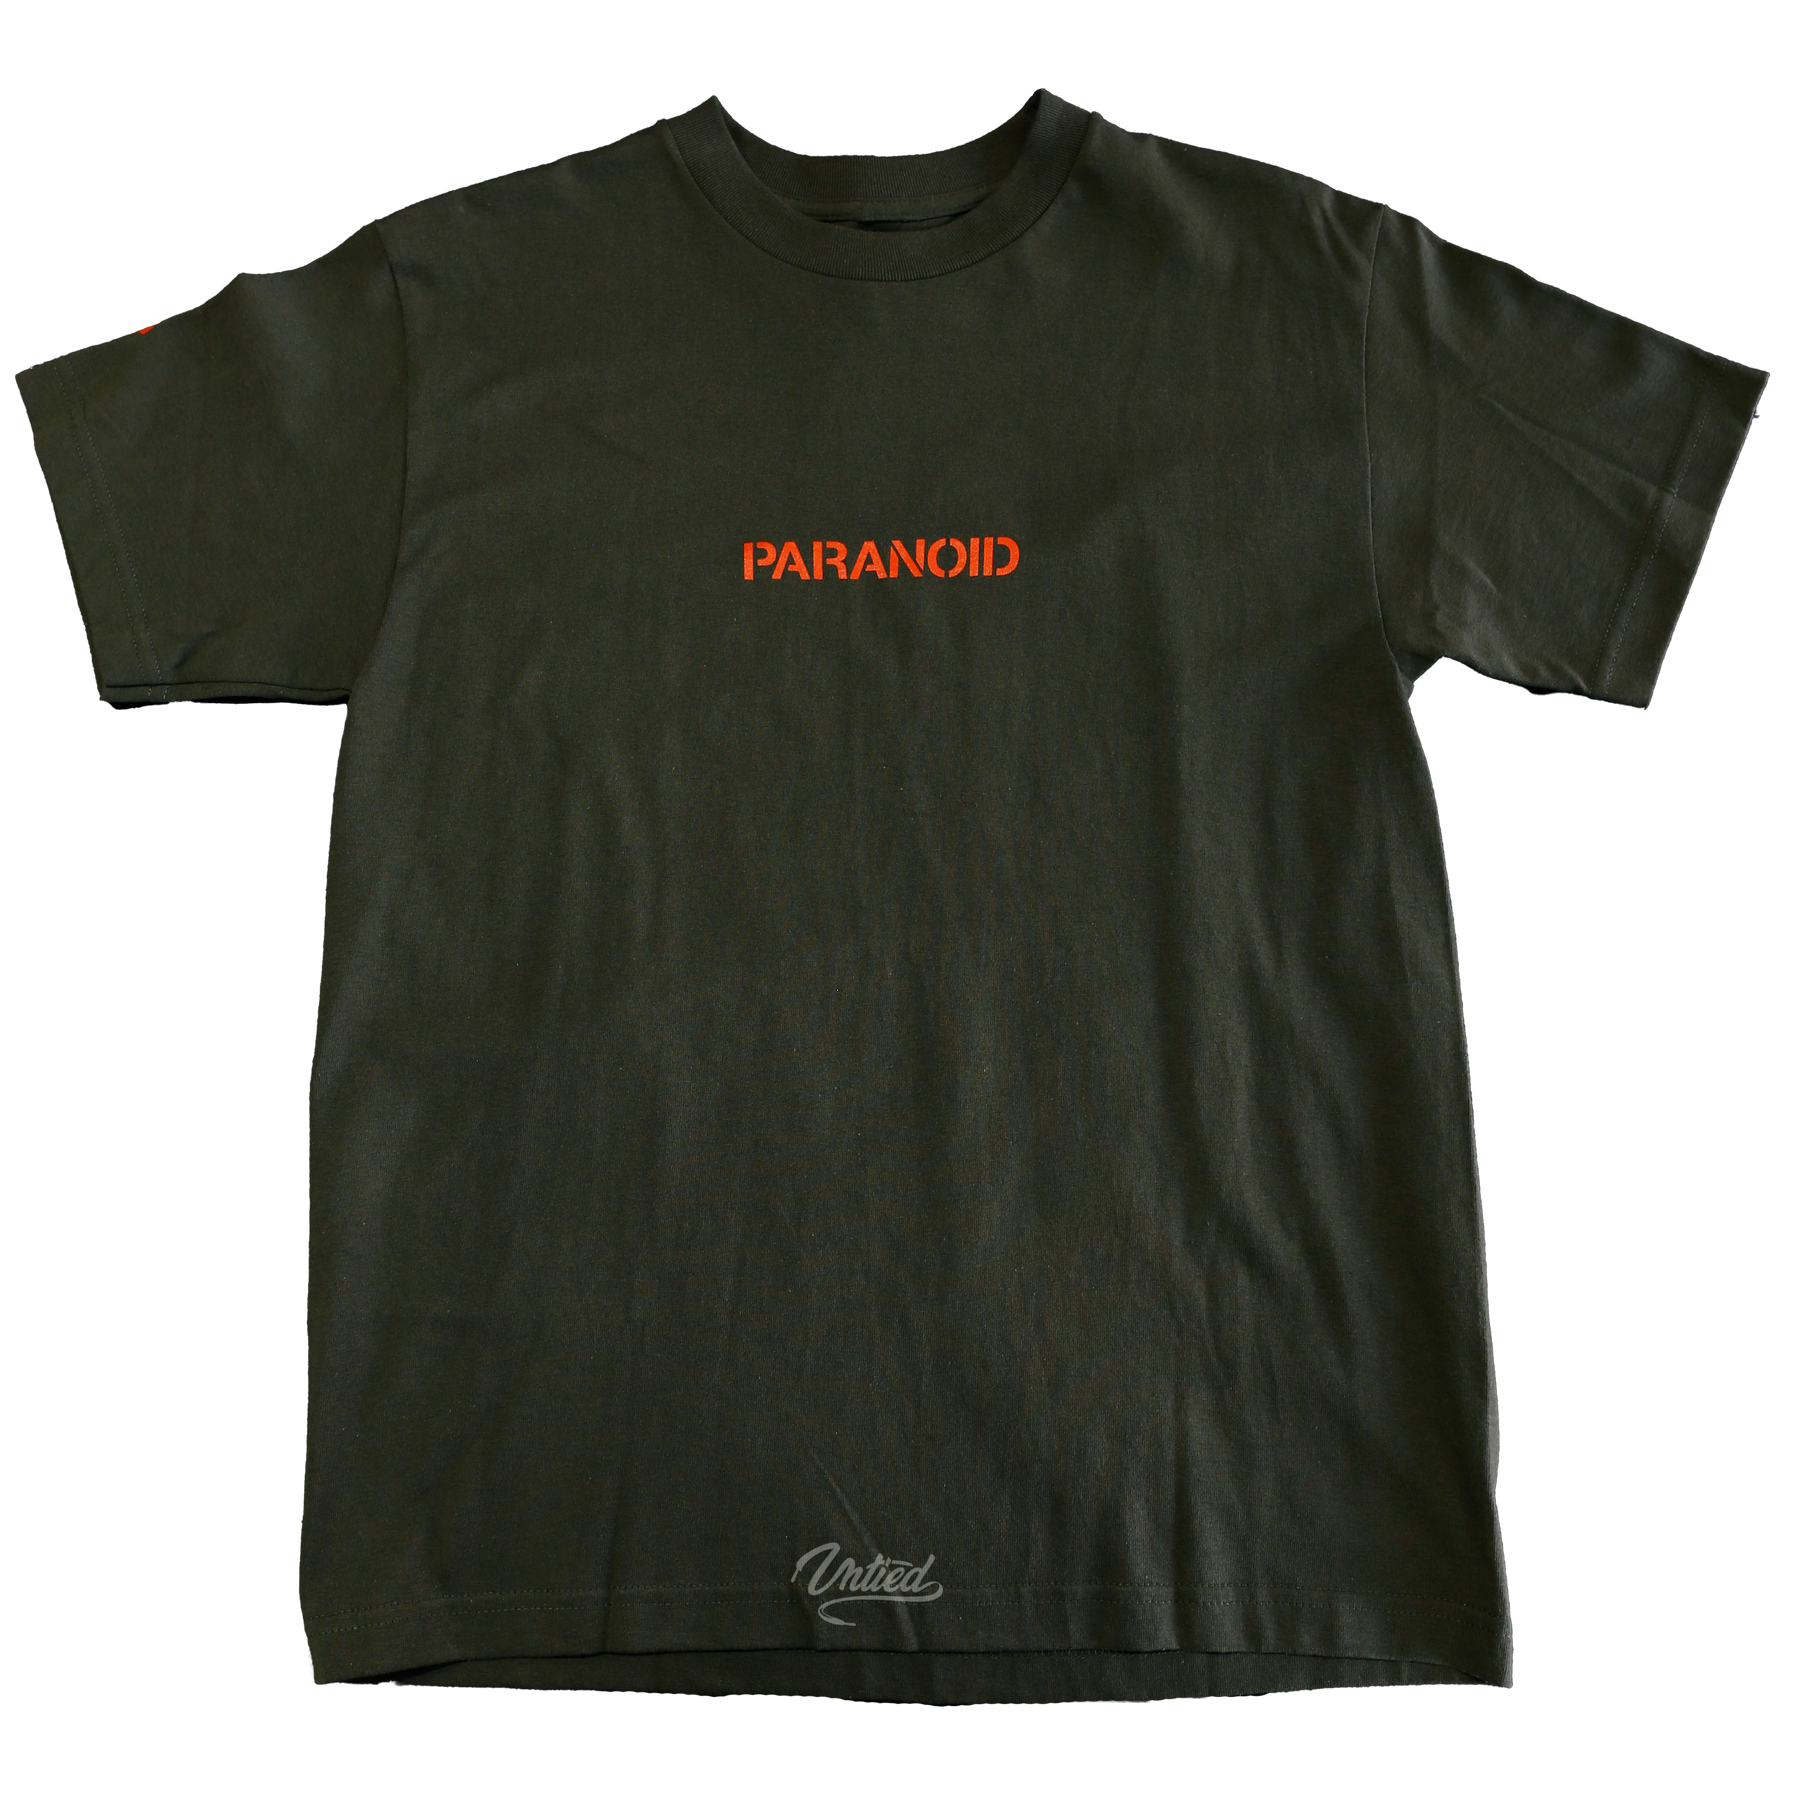 ASSC x Undefeated Paranoid Tee "Olive"